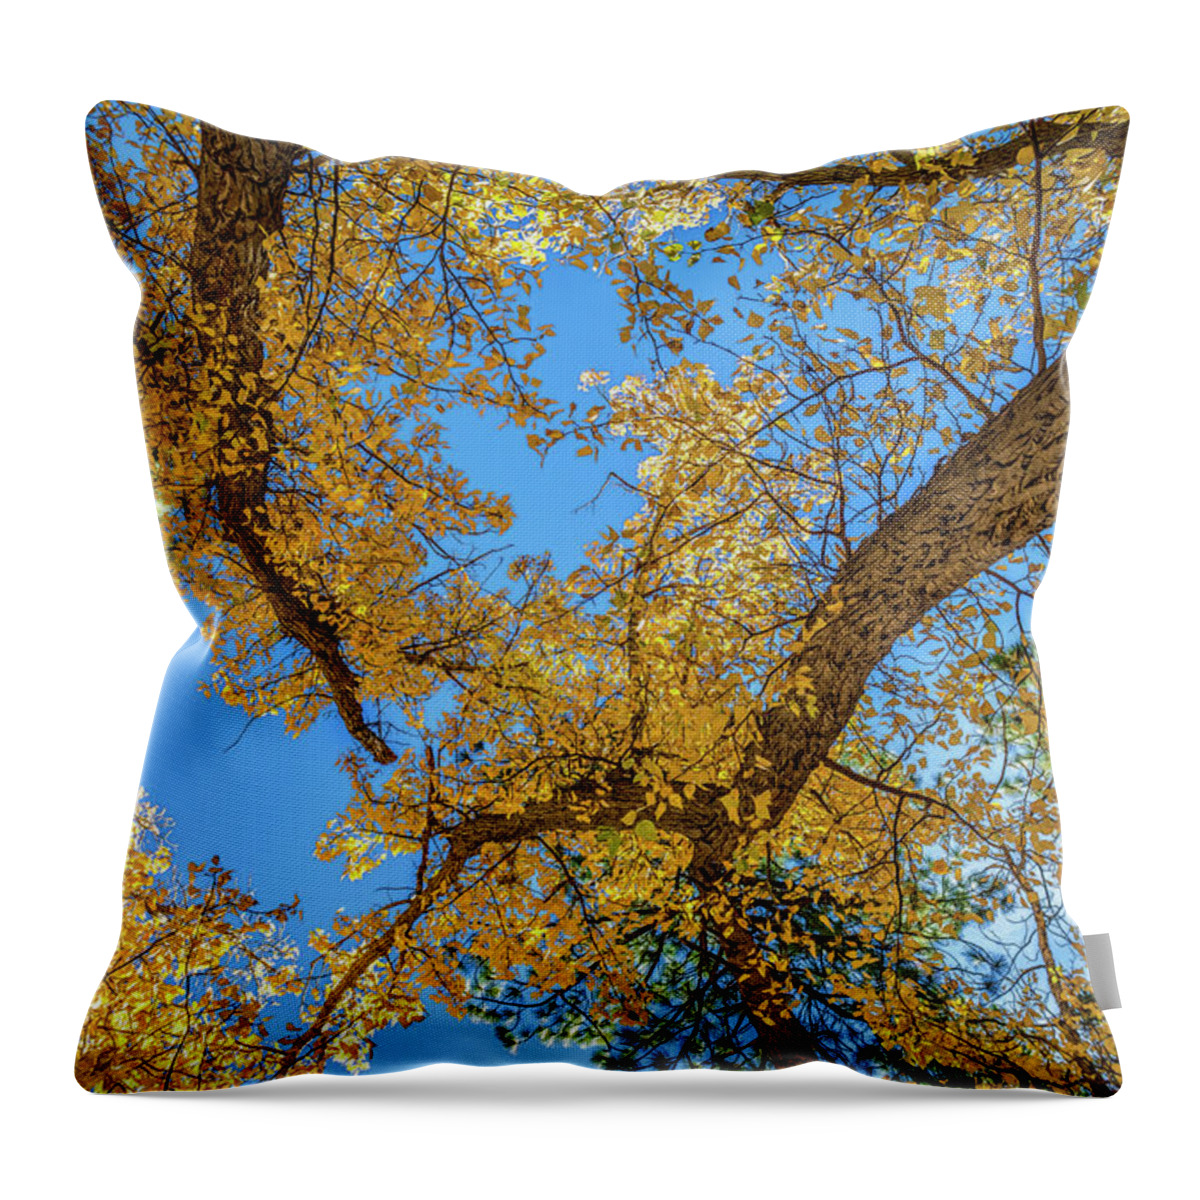 Autumn Throw Pillow featuring the photograph Looking Up by Maria Coulson